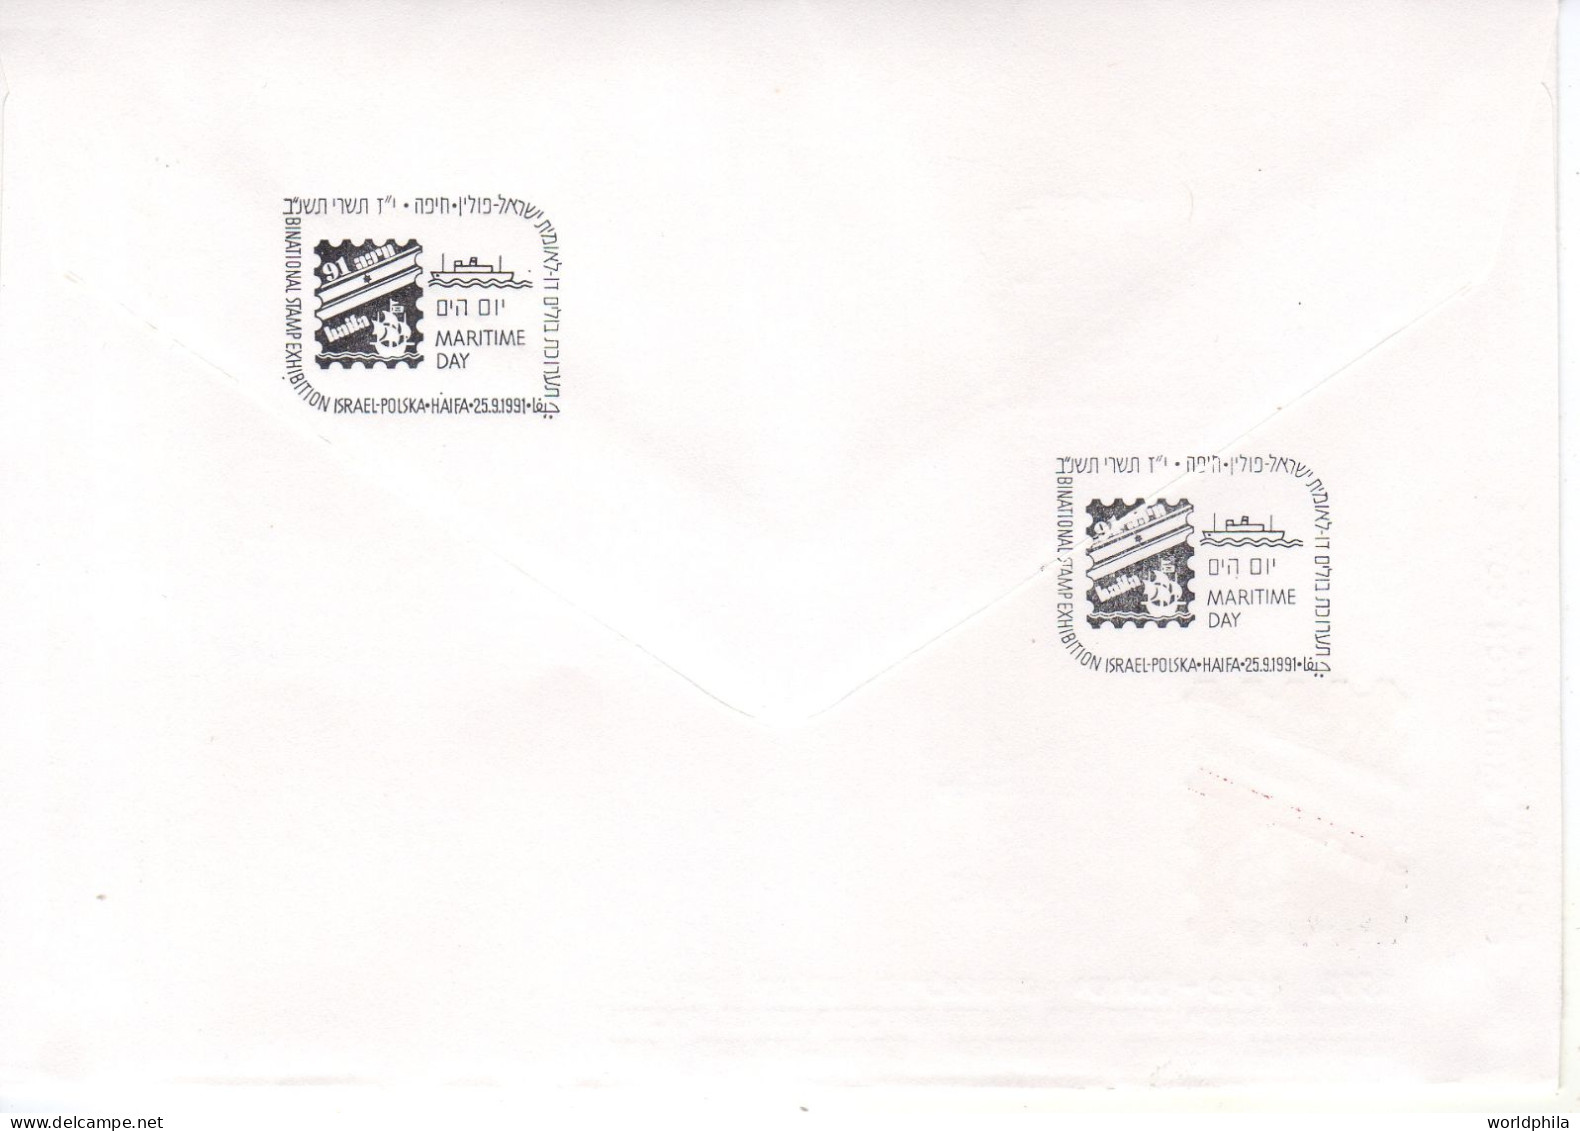 ISRAEL-Poland "Haifa 91" BiNational Stamp Exhibition Cacheted Cover "German Colony" Painting Souvenir Sheet - Lettres & Documents